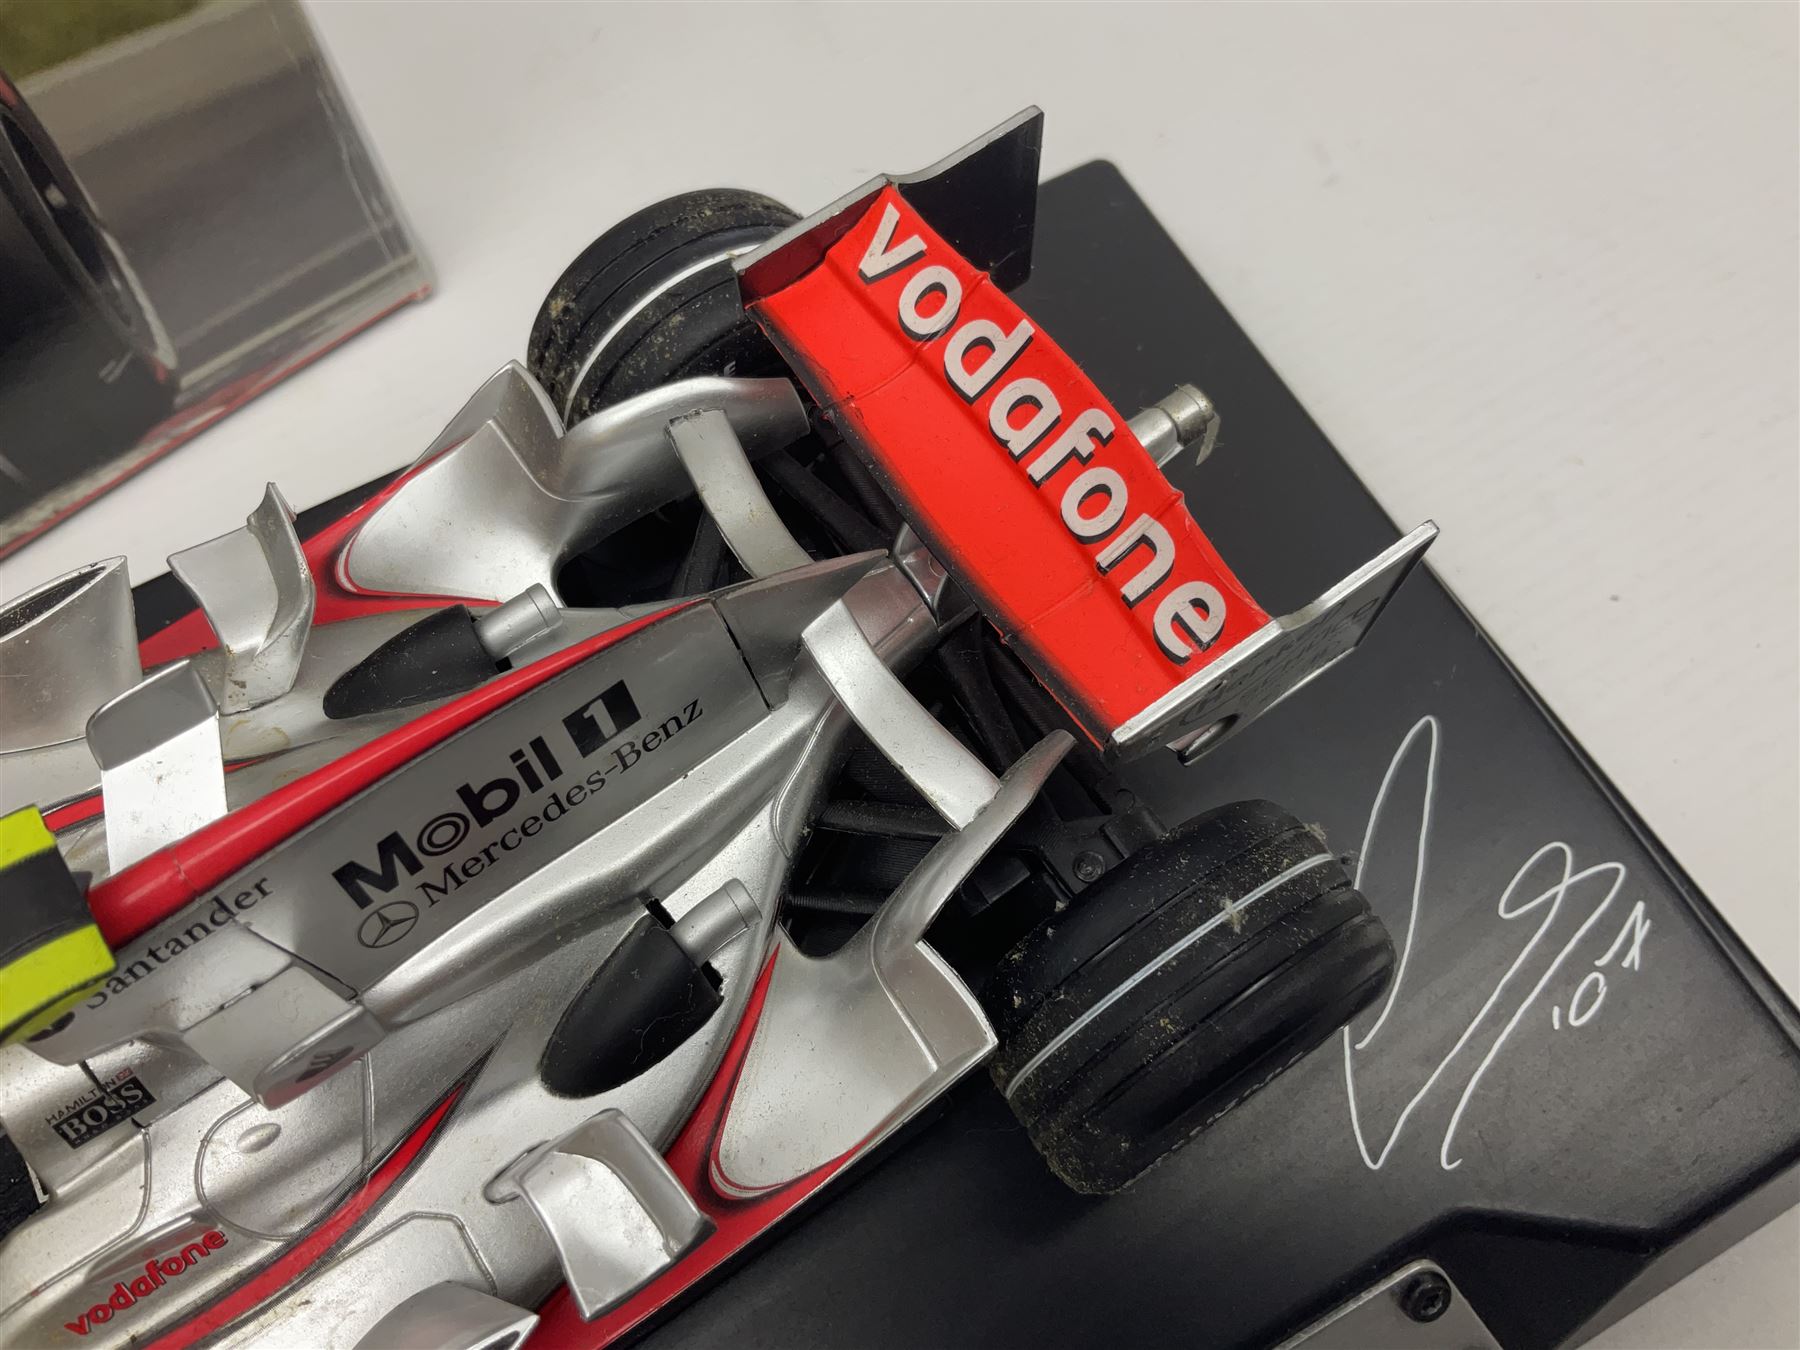 Mattel Hot Wheels 1:18 scale die-cast racing car - Vodaphone McLaren Mercedes; boxed with stand - Image 7 of 10